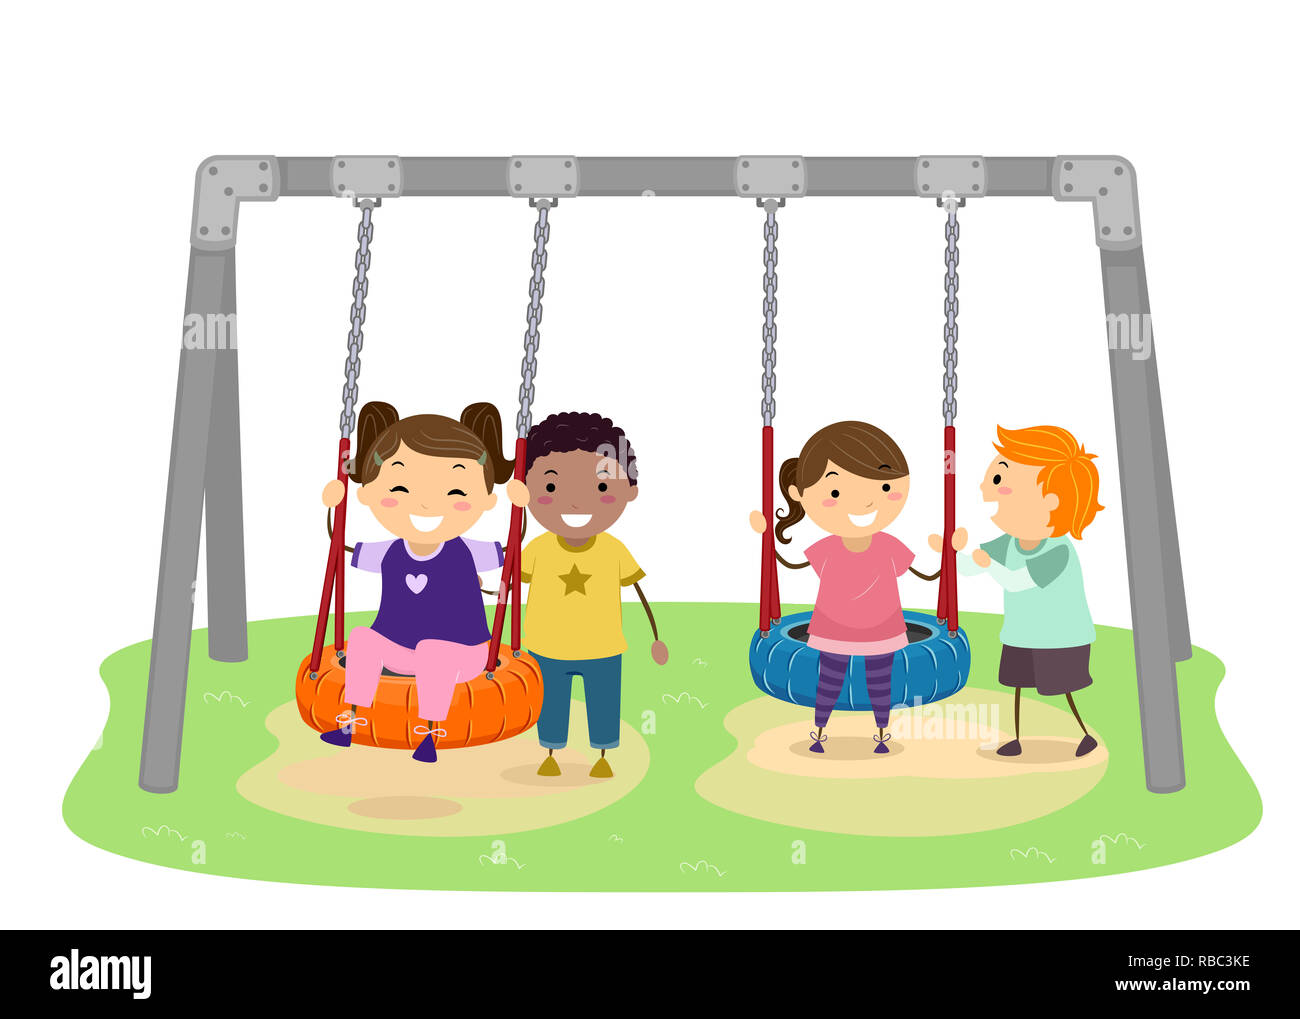 Illustration of Stickman Kids Playing in the Swing in the Playground ...